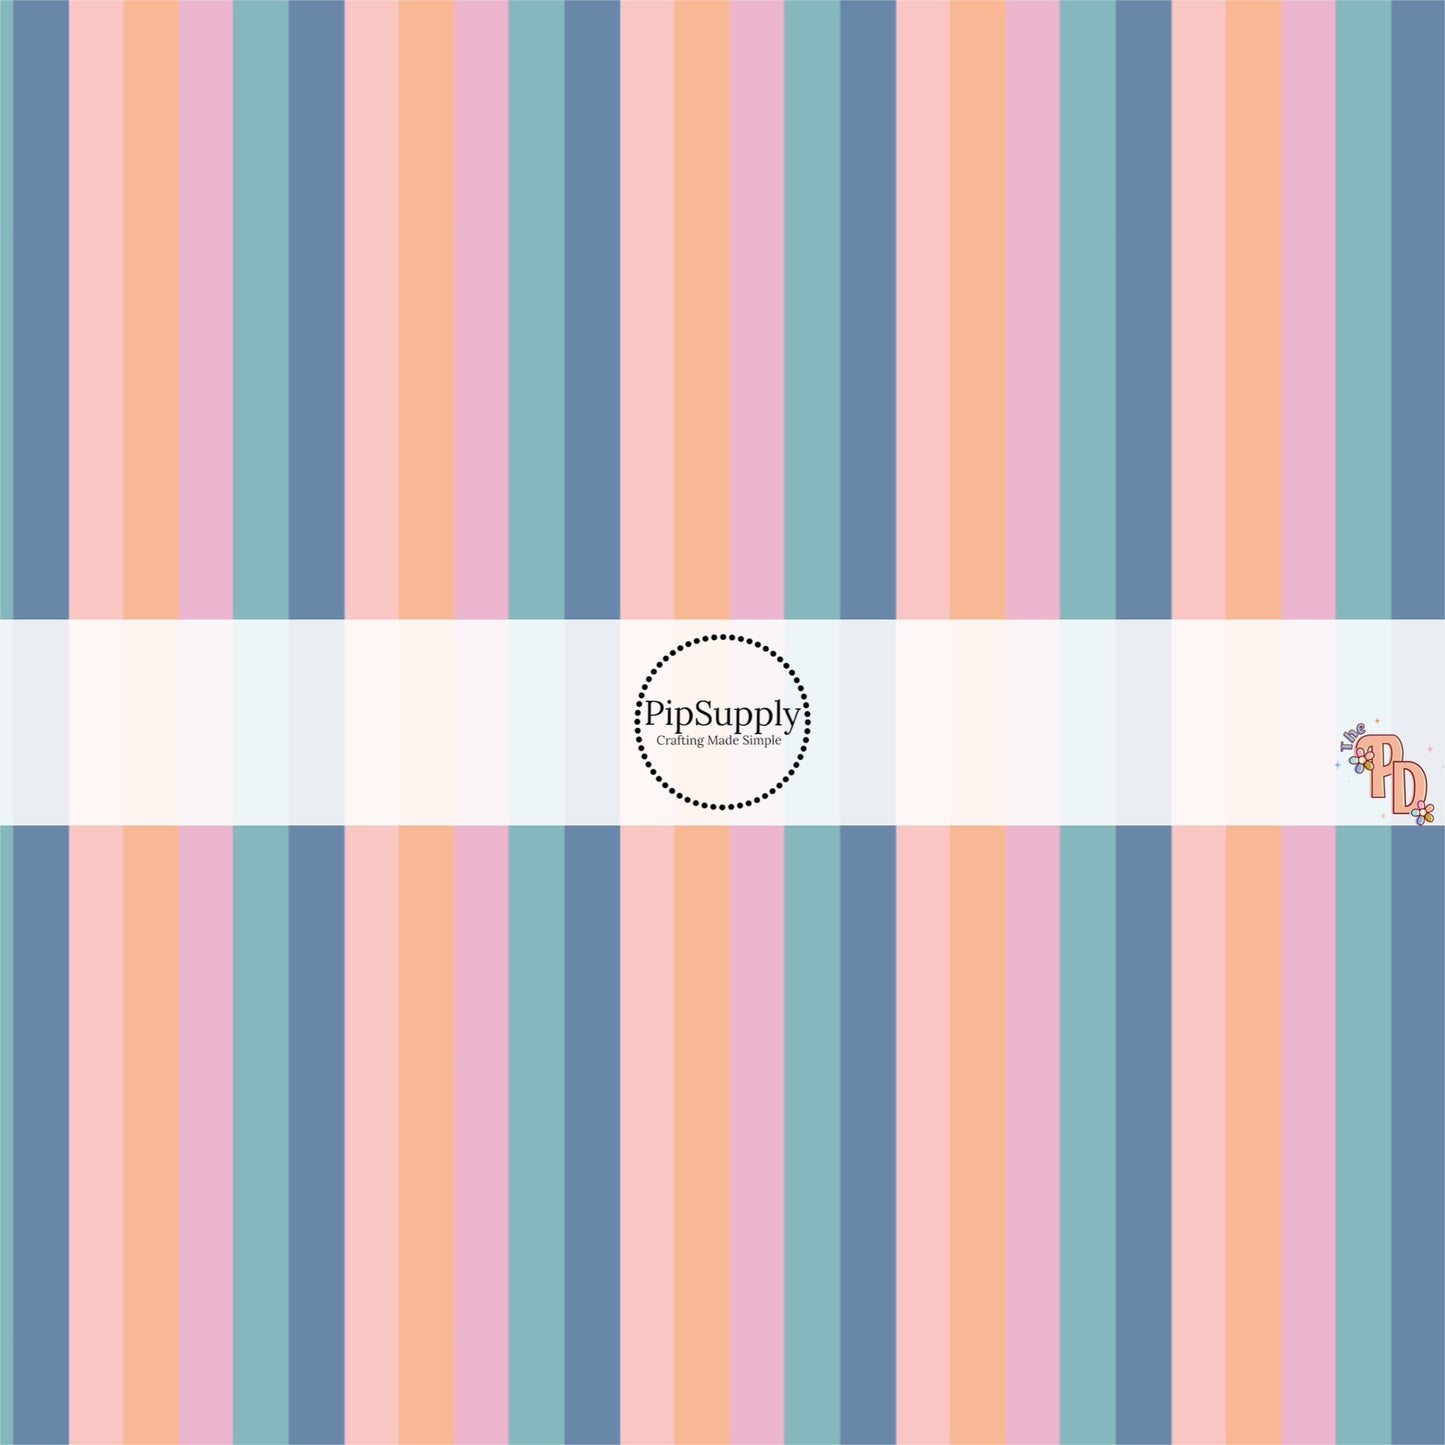 Peach and Light Blue Striped on Blue Fabric by the Yard.